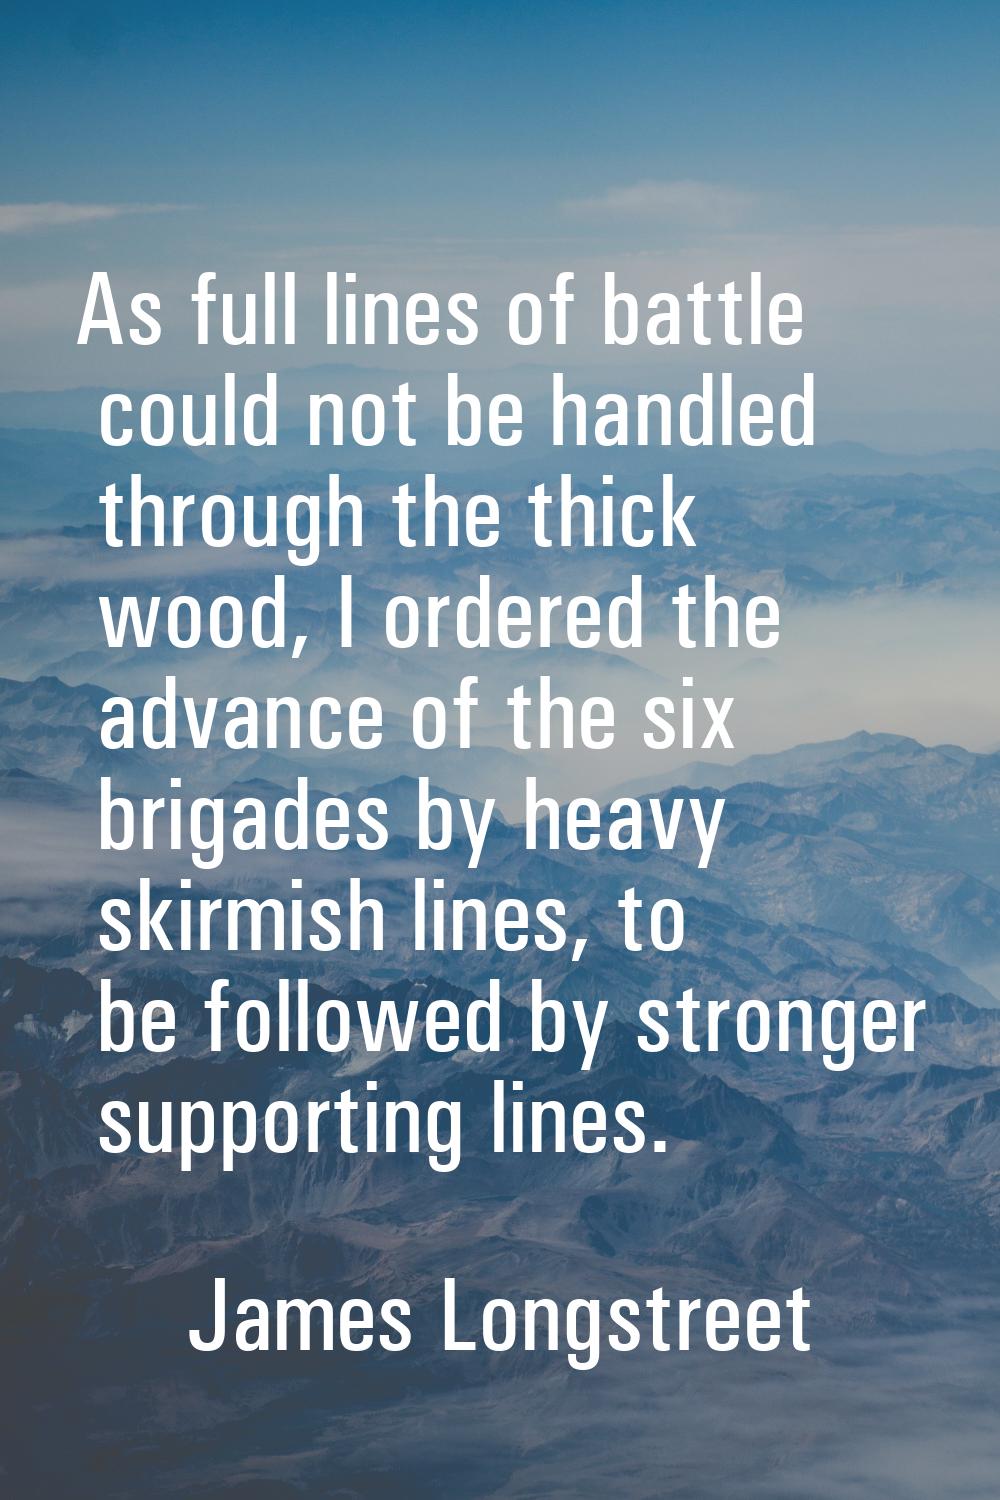 As full lines of battle could not be handled through the thick wood, I ordered the advance of the s